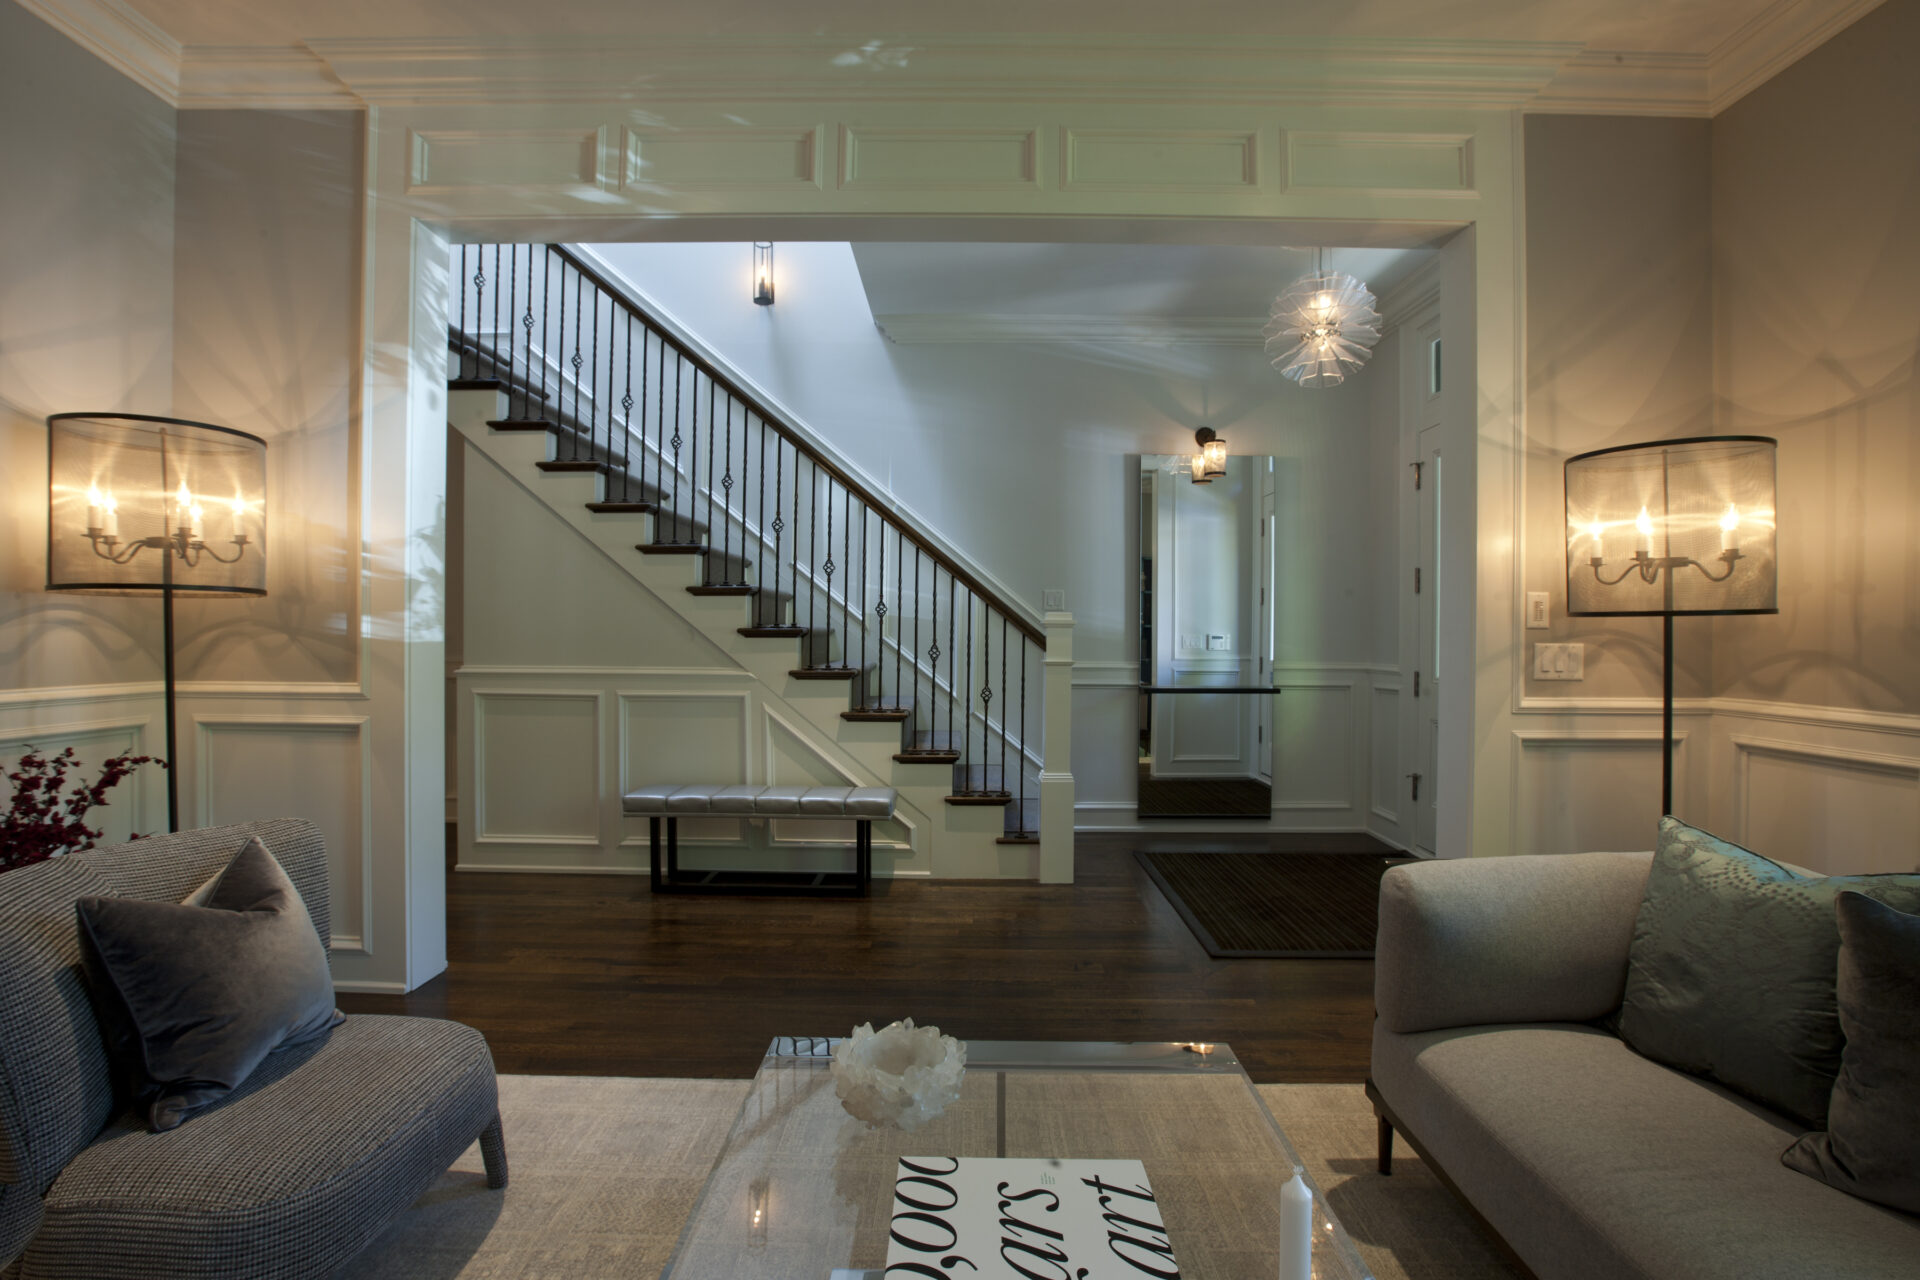 Home living space with staircase